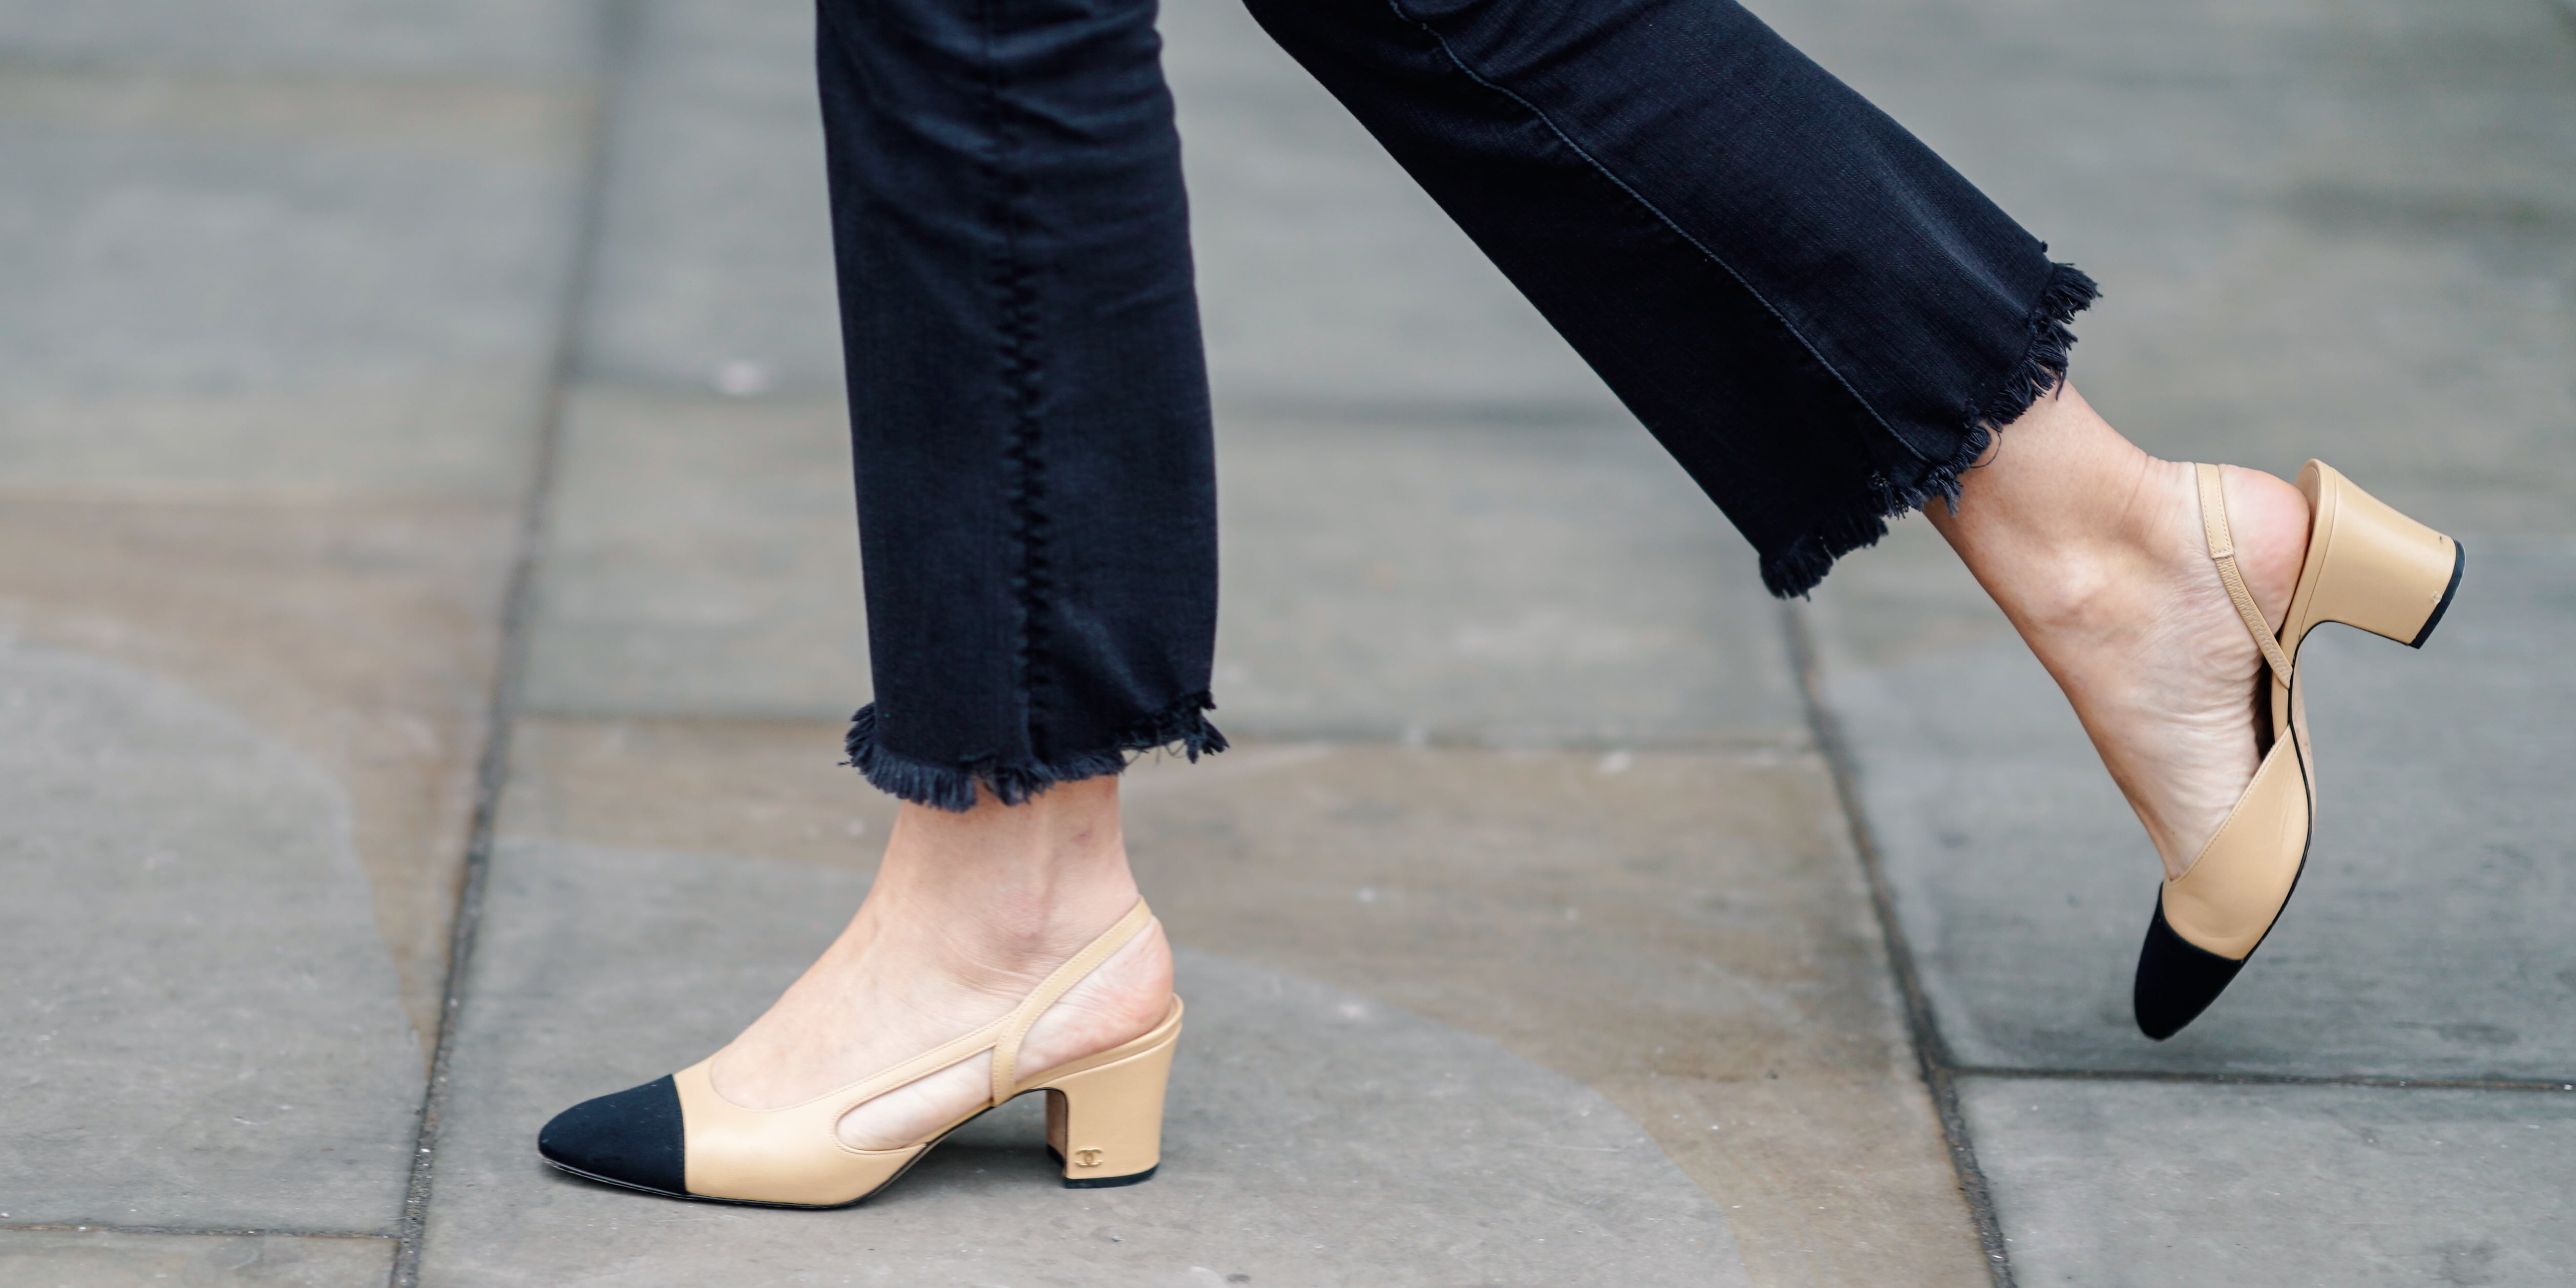 Stylish and Comfortable Heels to Wear to Work | POPSUGAR Fashion